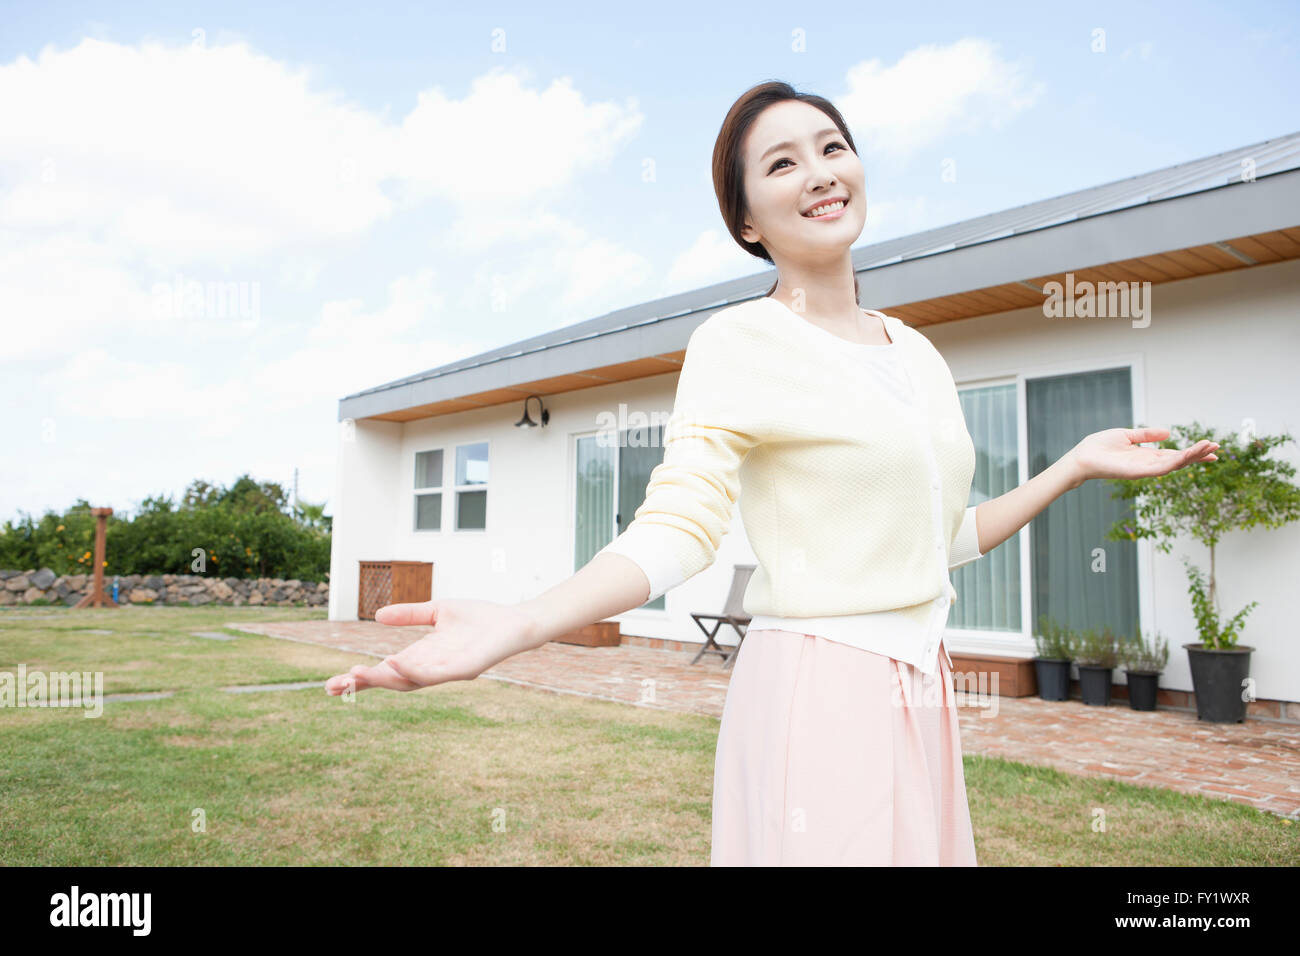 Woman with her arms open at the yard of a house representing rural life Stock Photo